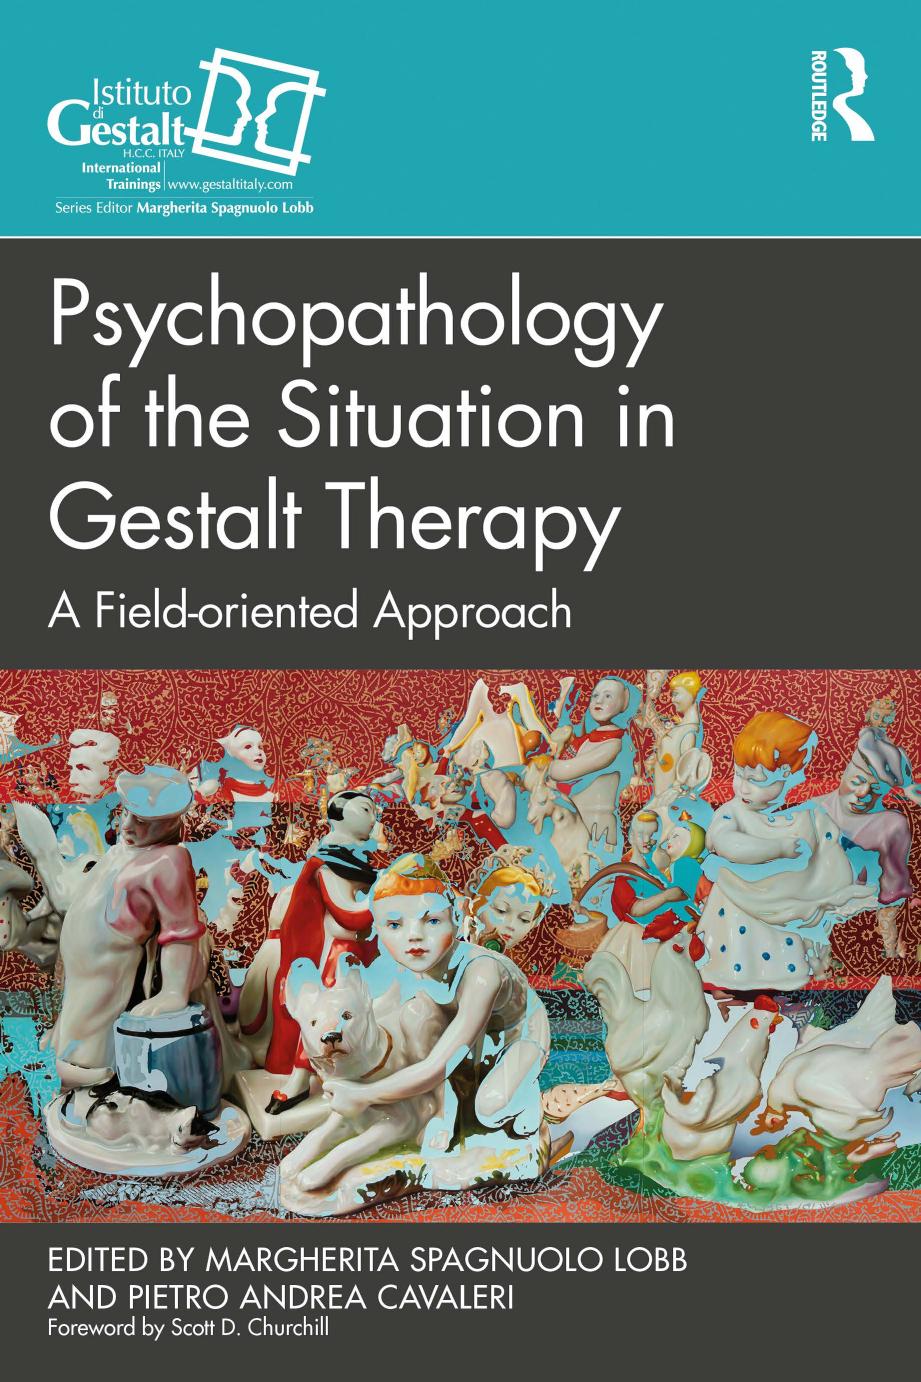 Psychopathology of the Situation in Gestalt Therapy: A Field-oriented Approach by Margherita Spagnuolo Lobb Pietro Andrea Cavaleri